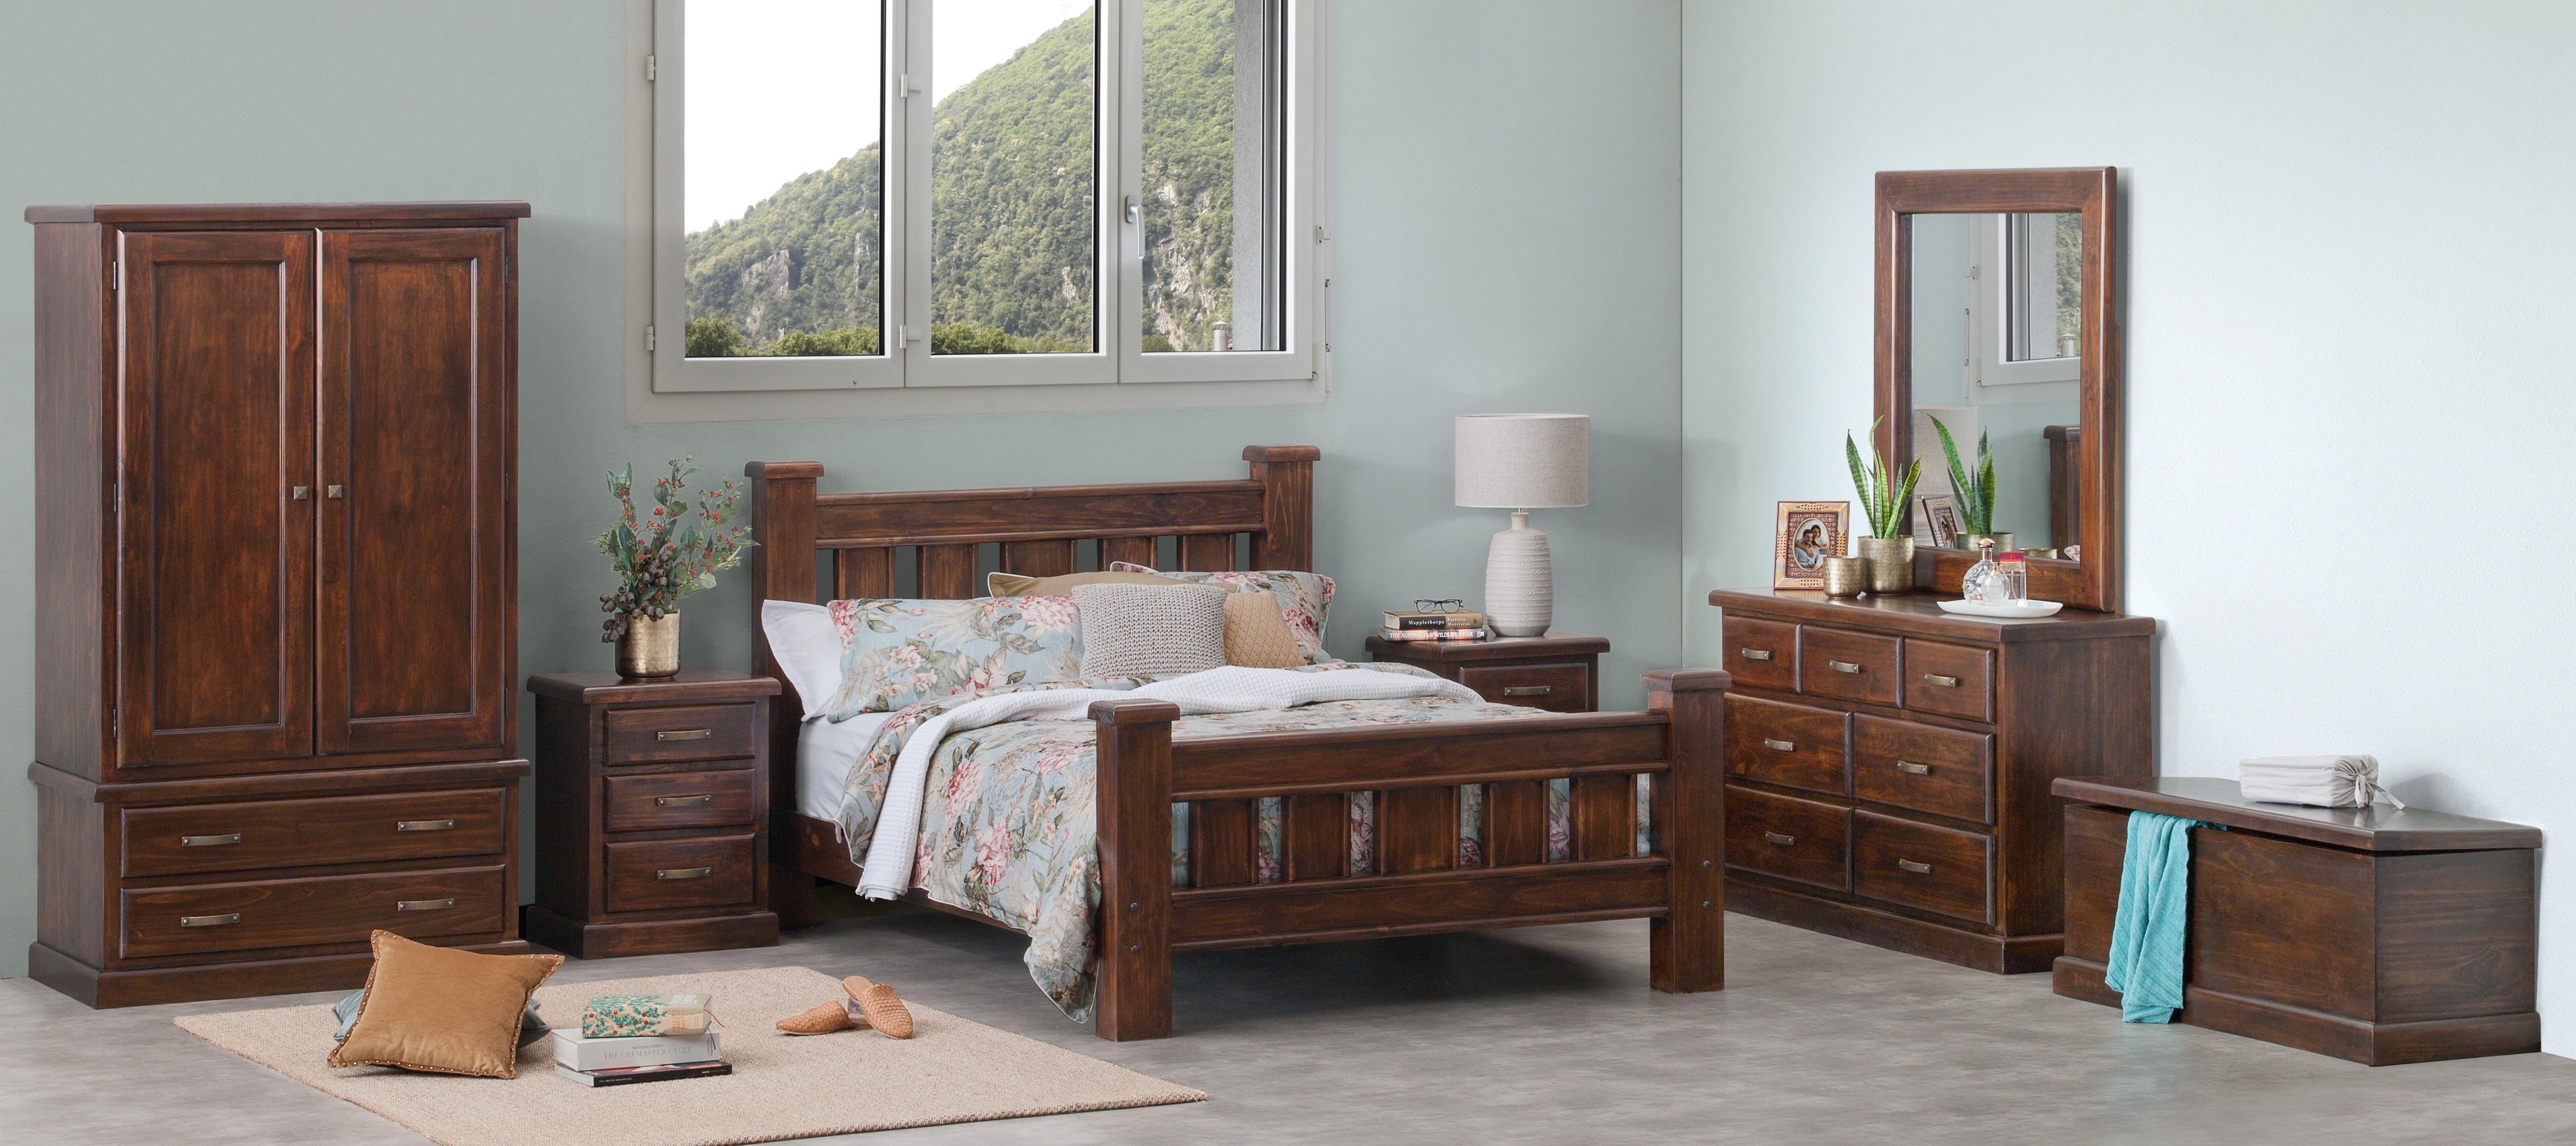 Caribbean Bedroom Collection